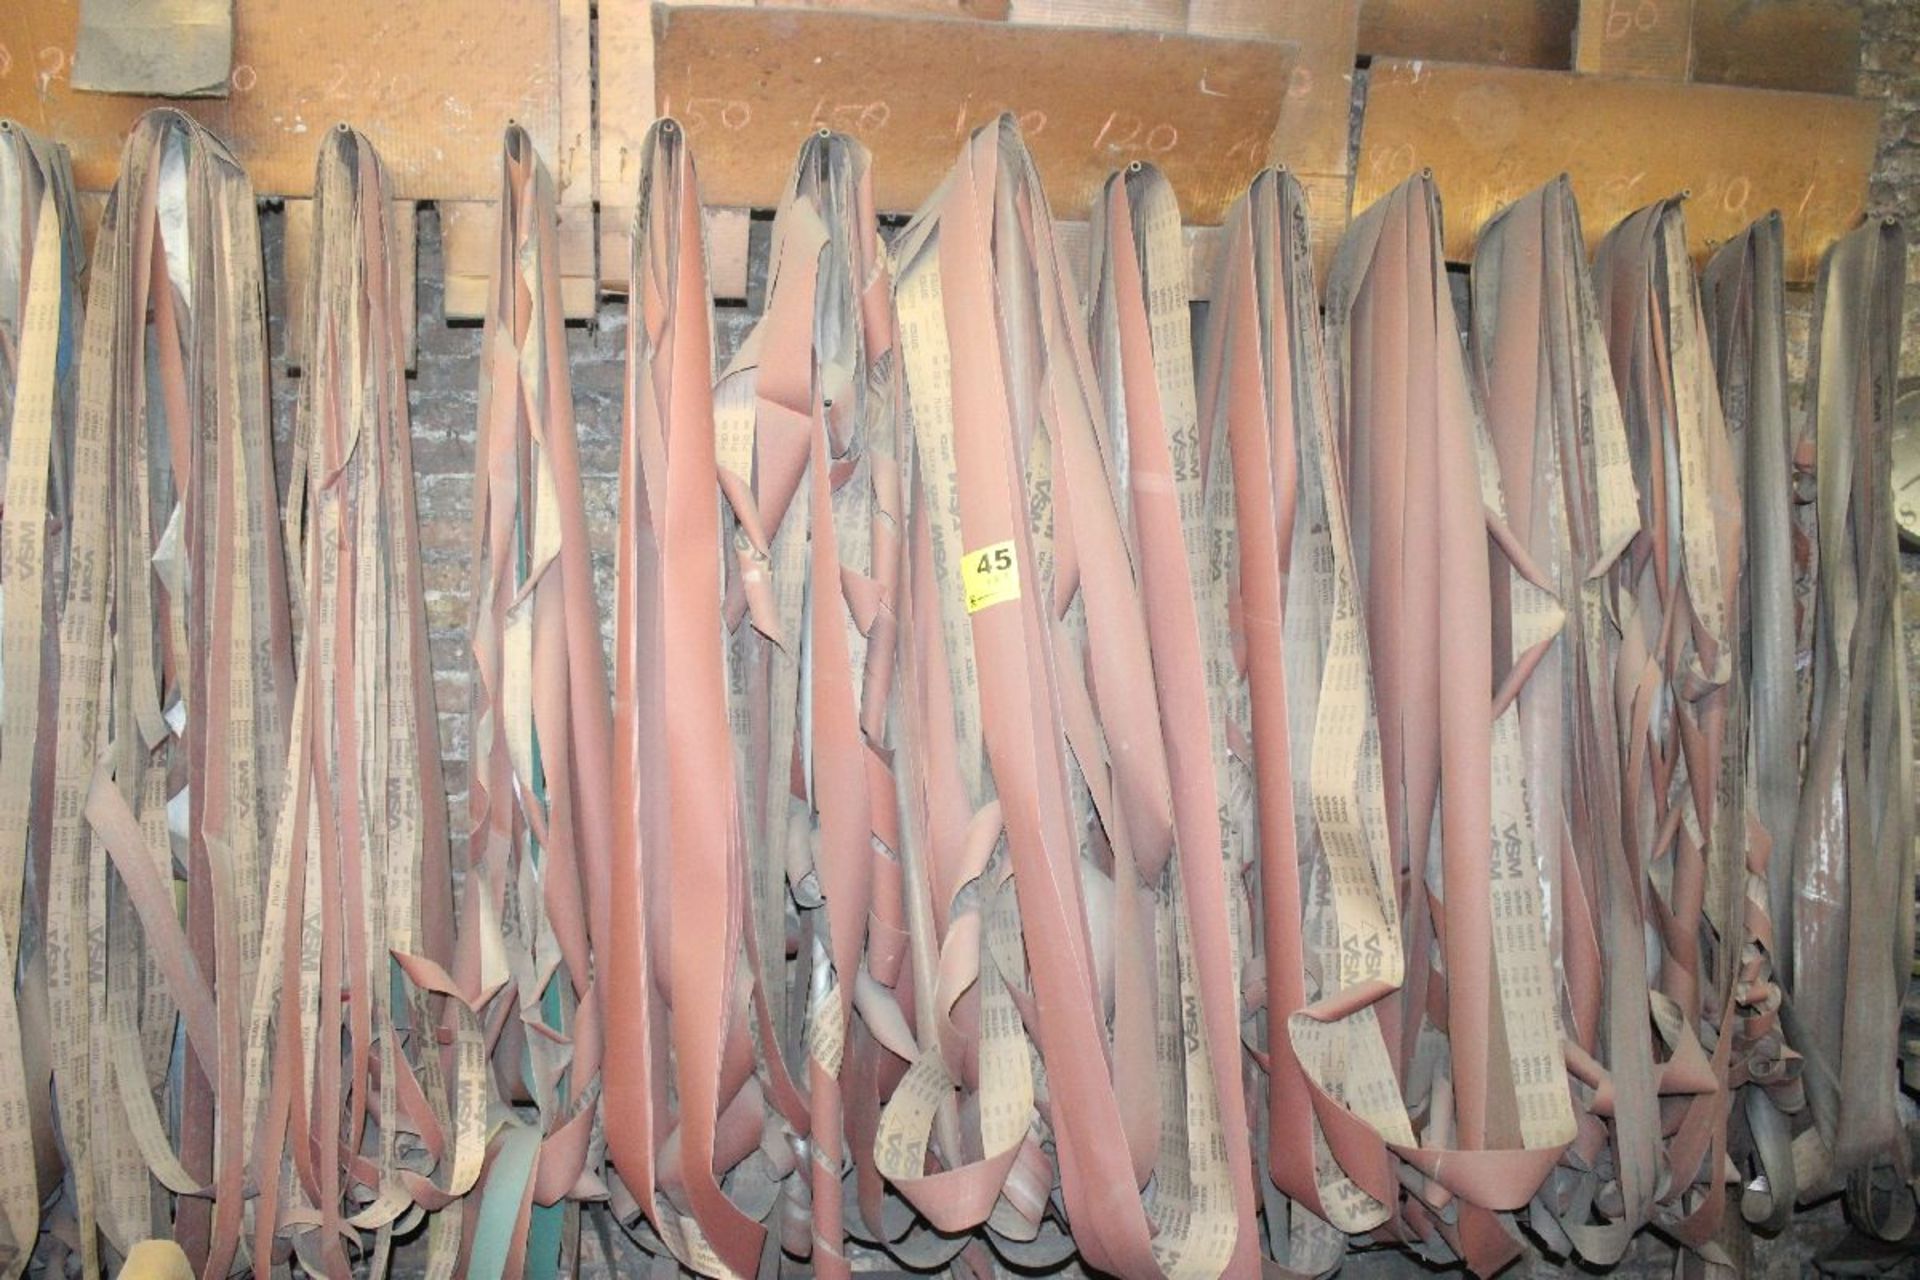 LOT-ASSORTED ABRASIVE BELTS ON WALL